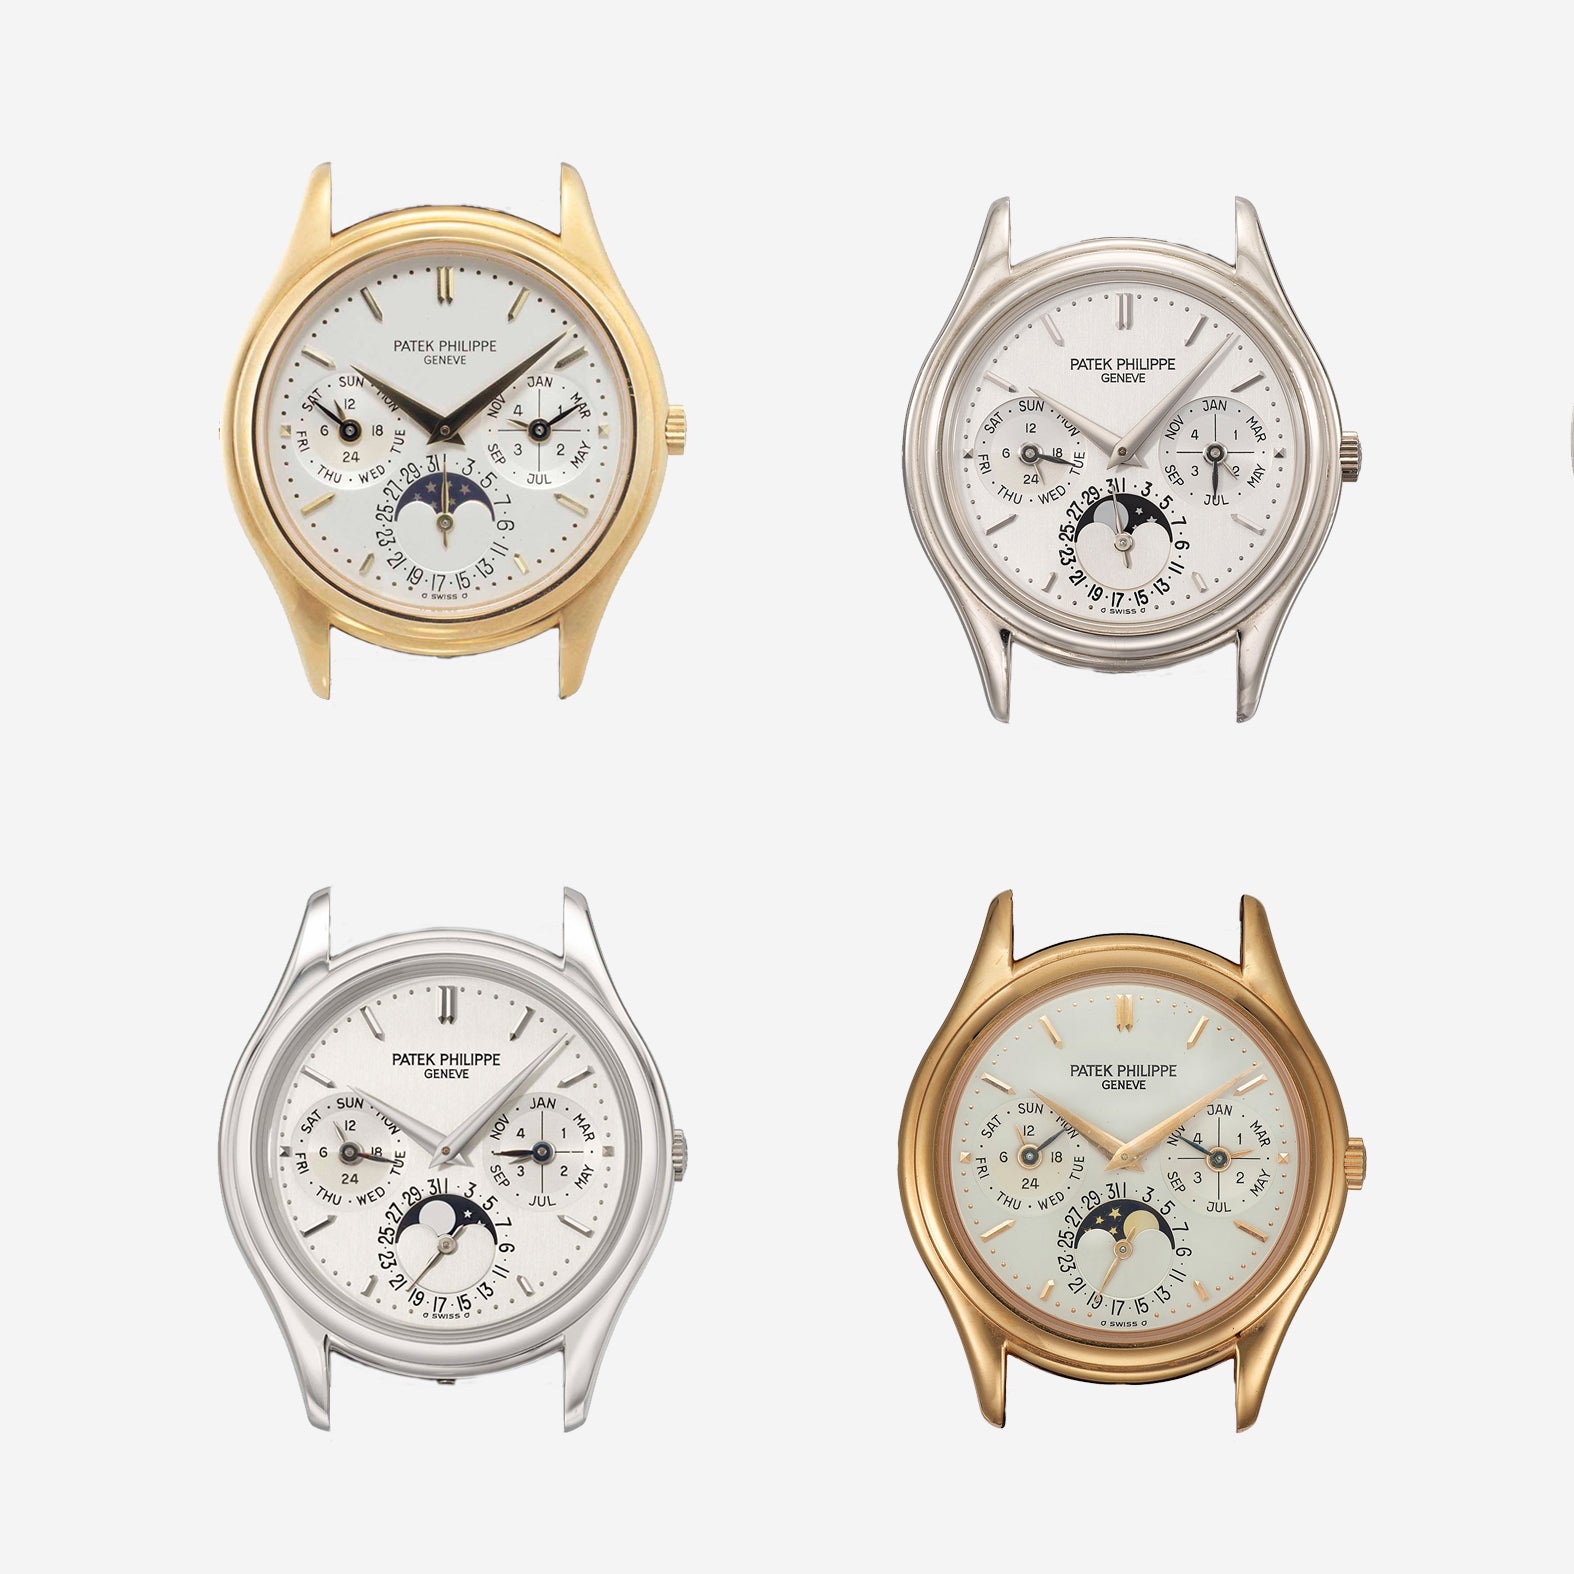 Patek Philippe 3940 in all metal vartiations, yellow gold, white gold, rose gold and platinum